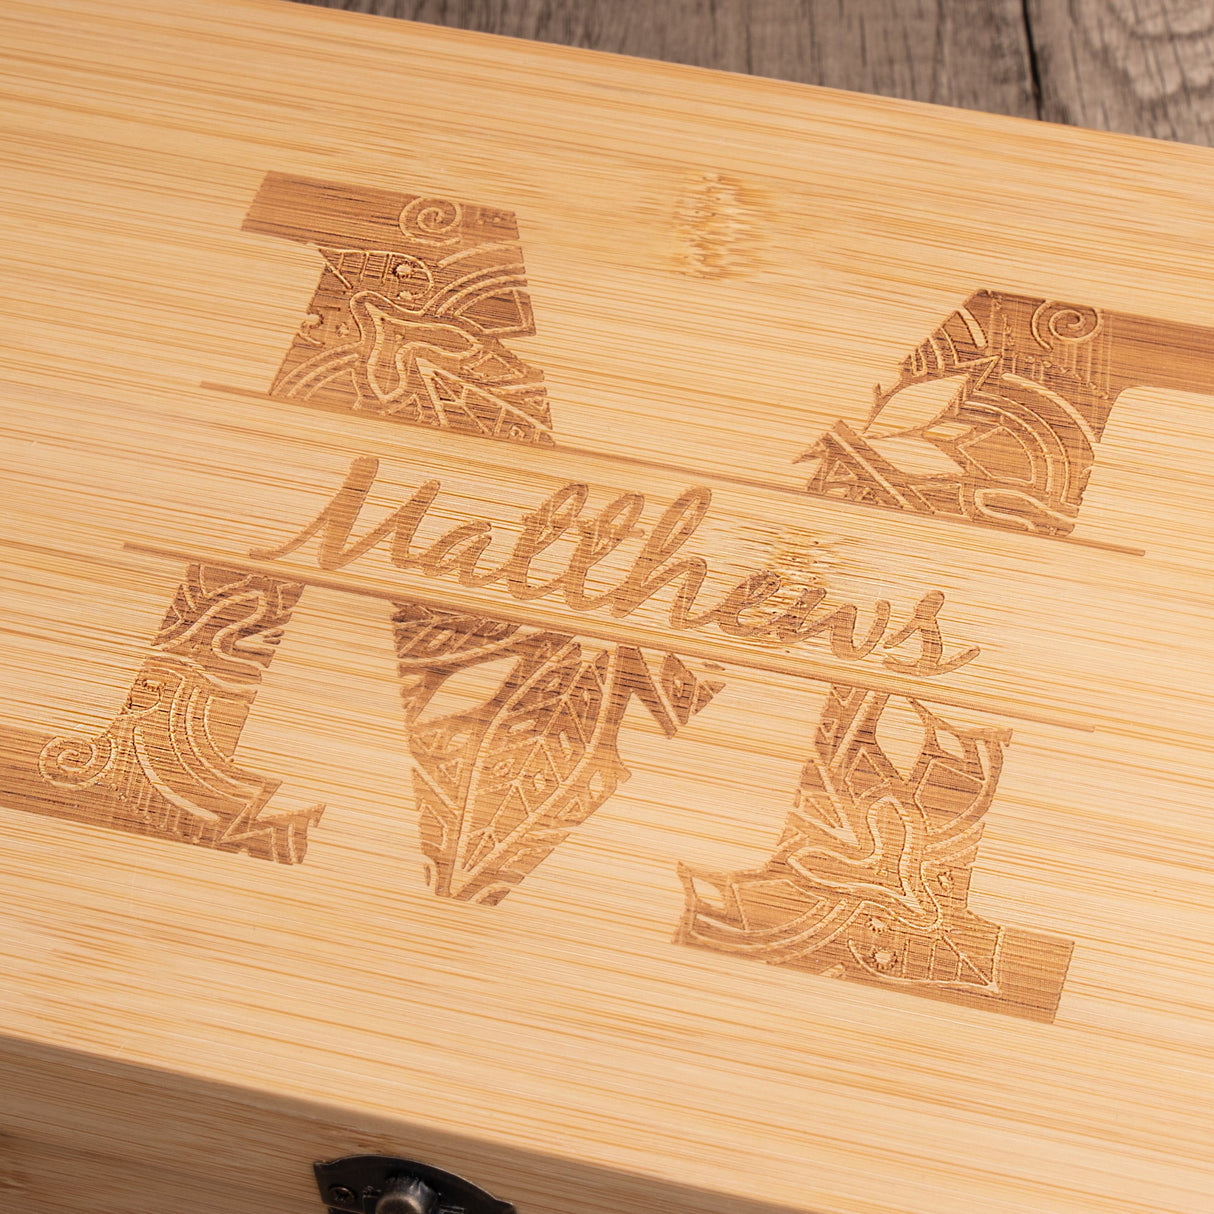 Personalized Engraved Wooden Tea Storage Box - GexWorldwide